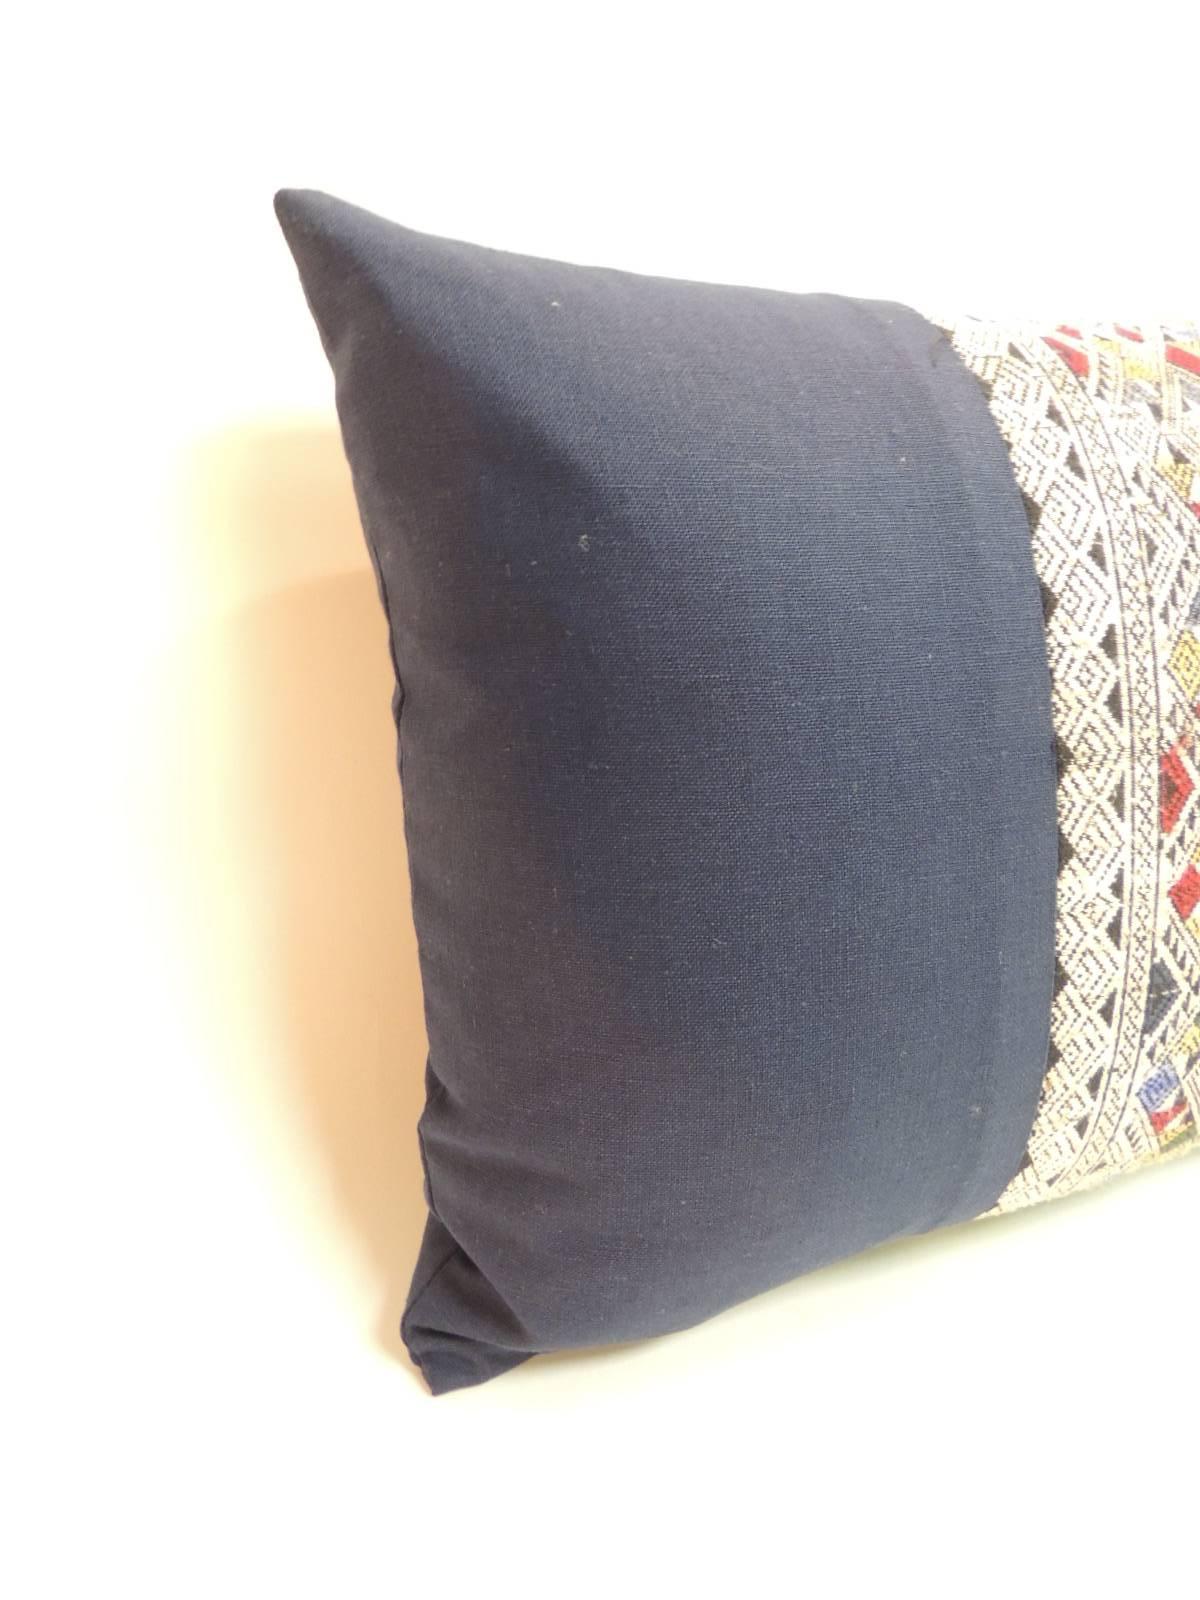 Asian embroidered decorative lumbar pair of pillows with an intricate woven silk-on-silk centered trim framed with royal blue textured linen. The same textured royal blue linen in the front was used to finish the back of the accent pillows. Throw